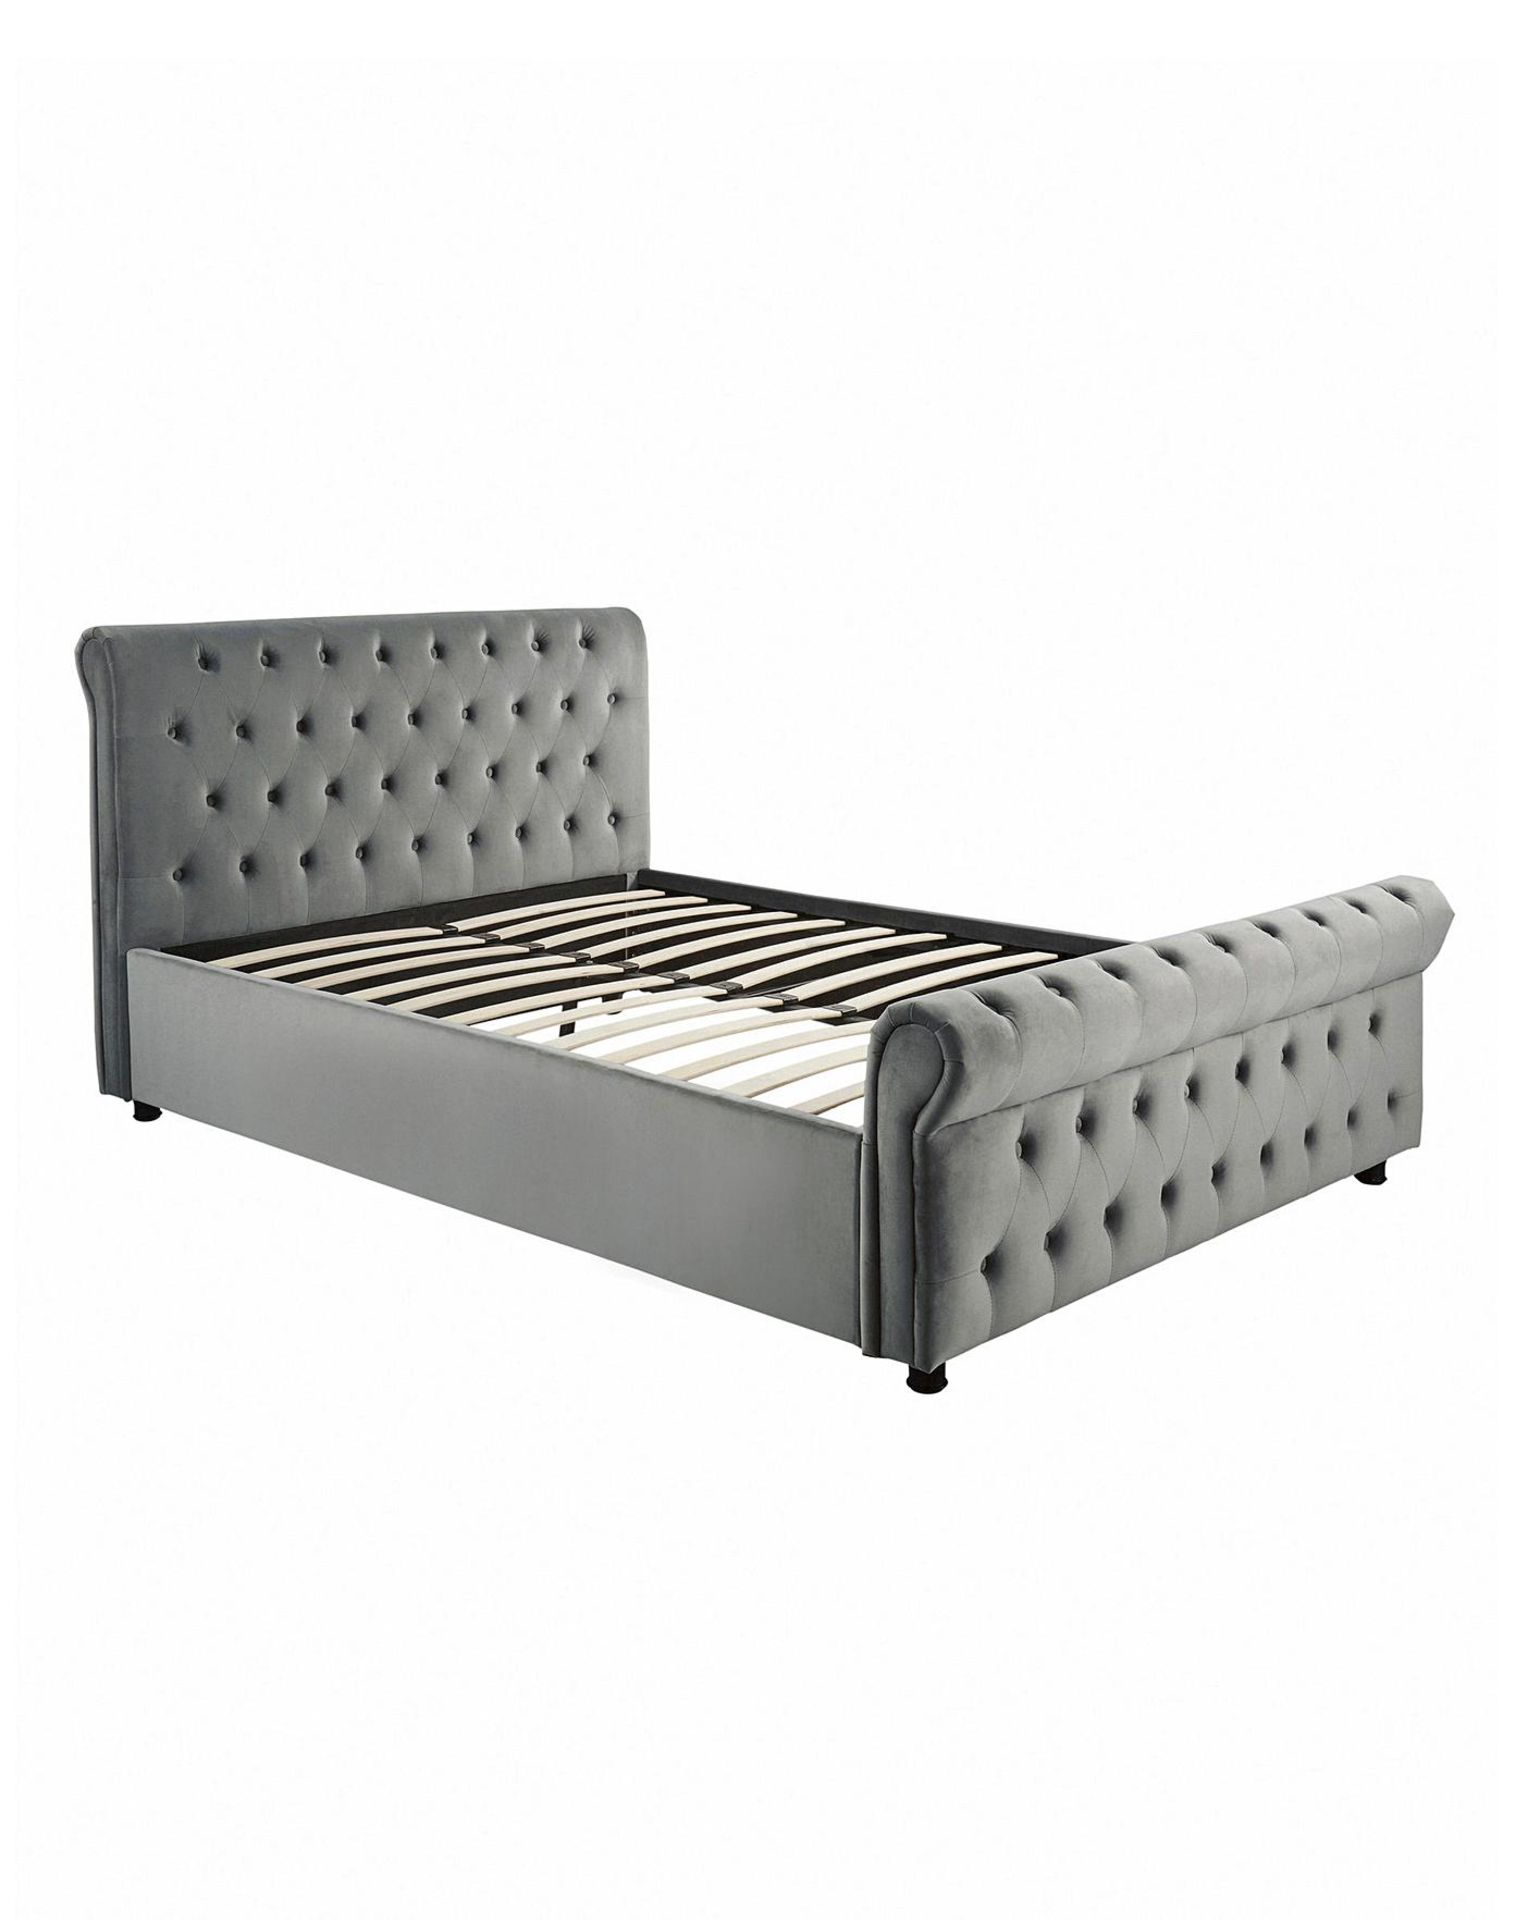 BRAND NEW KINGSTON CHARCOAL DOUBLE FABRIC BEDFRAME R16-12